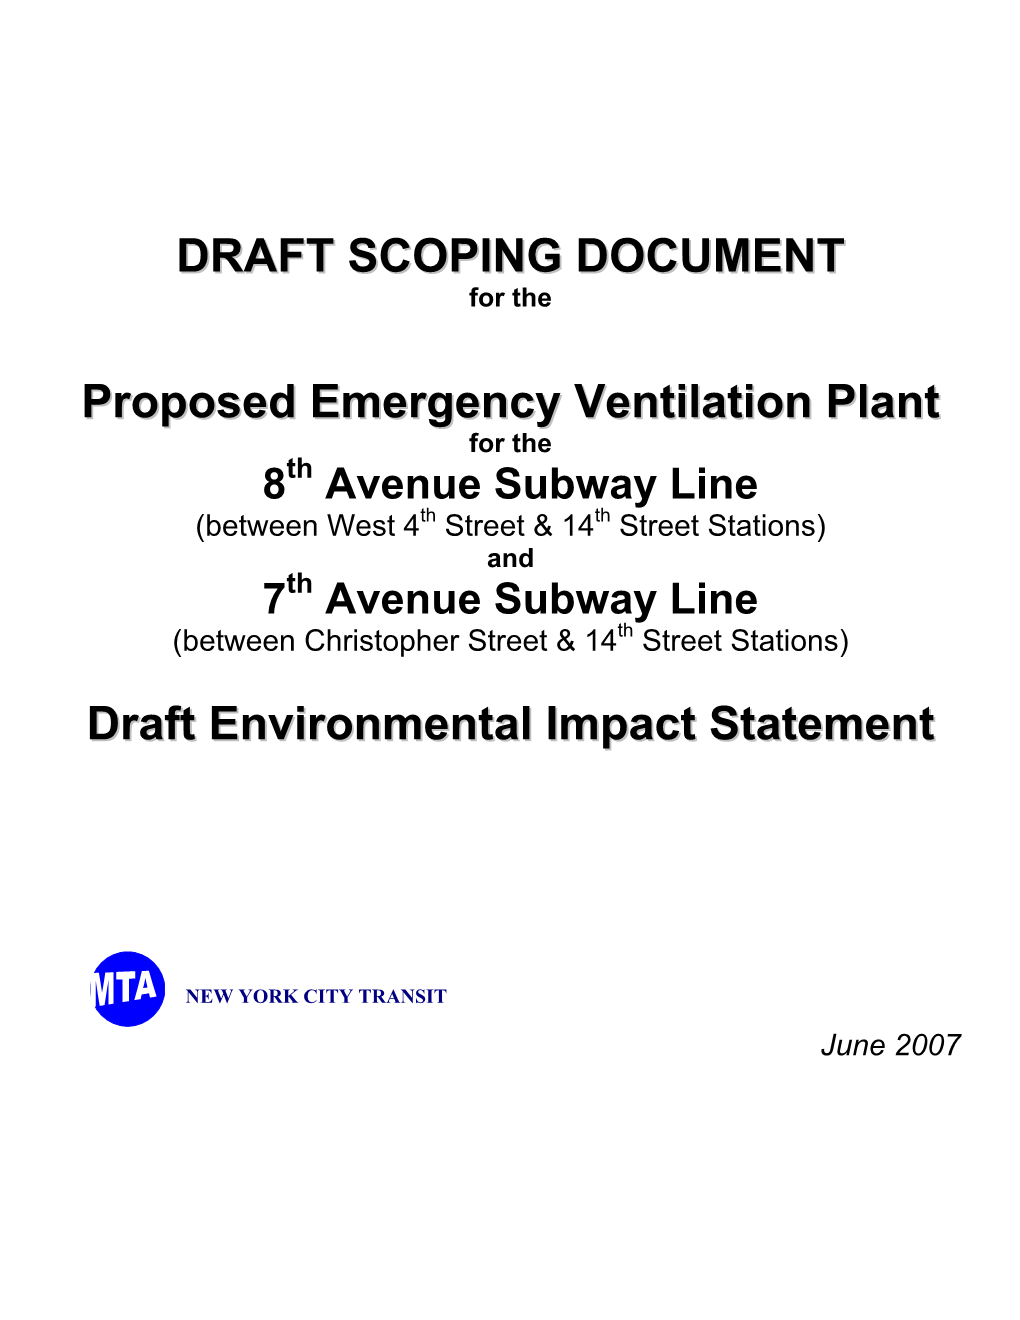 Proposed Emergency Ventilation Plant Serving 8Th and 7Th Avenue Subway Lines